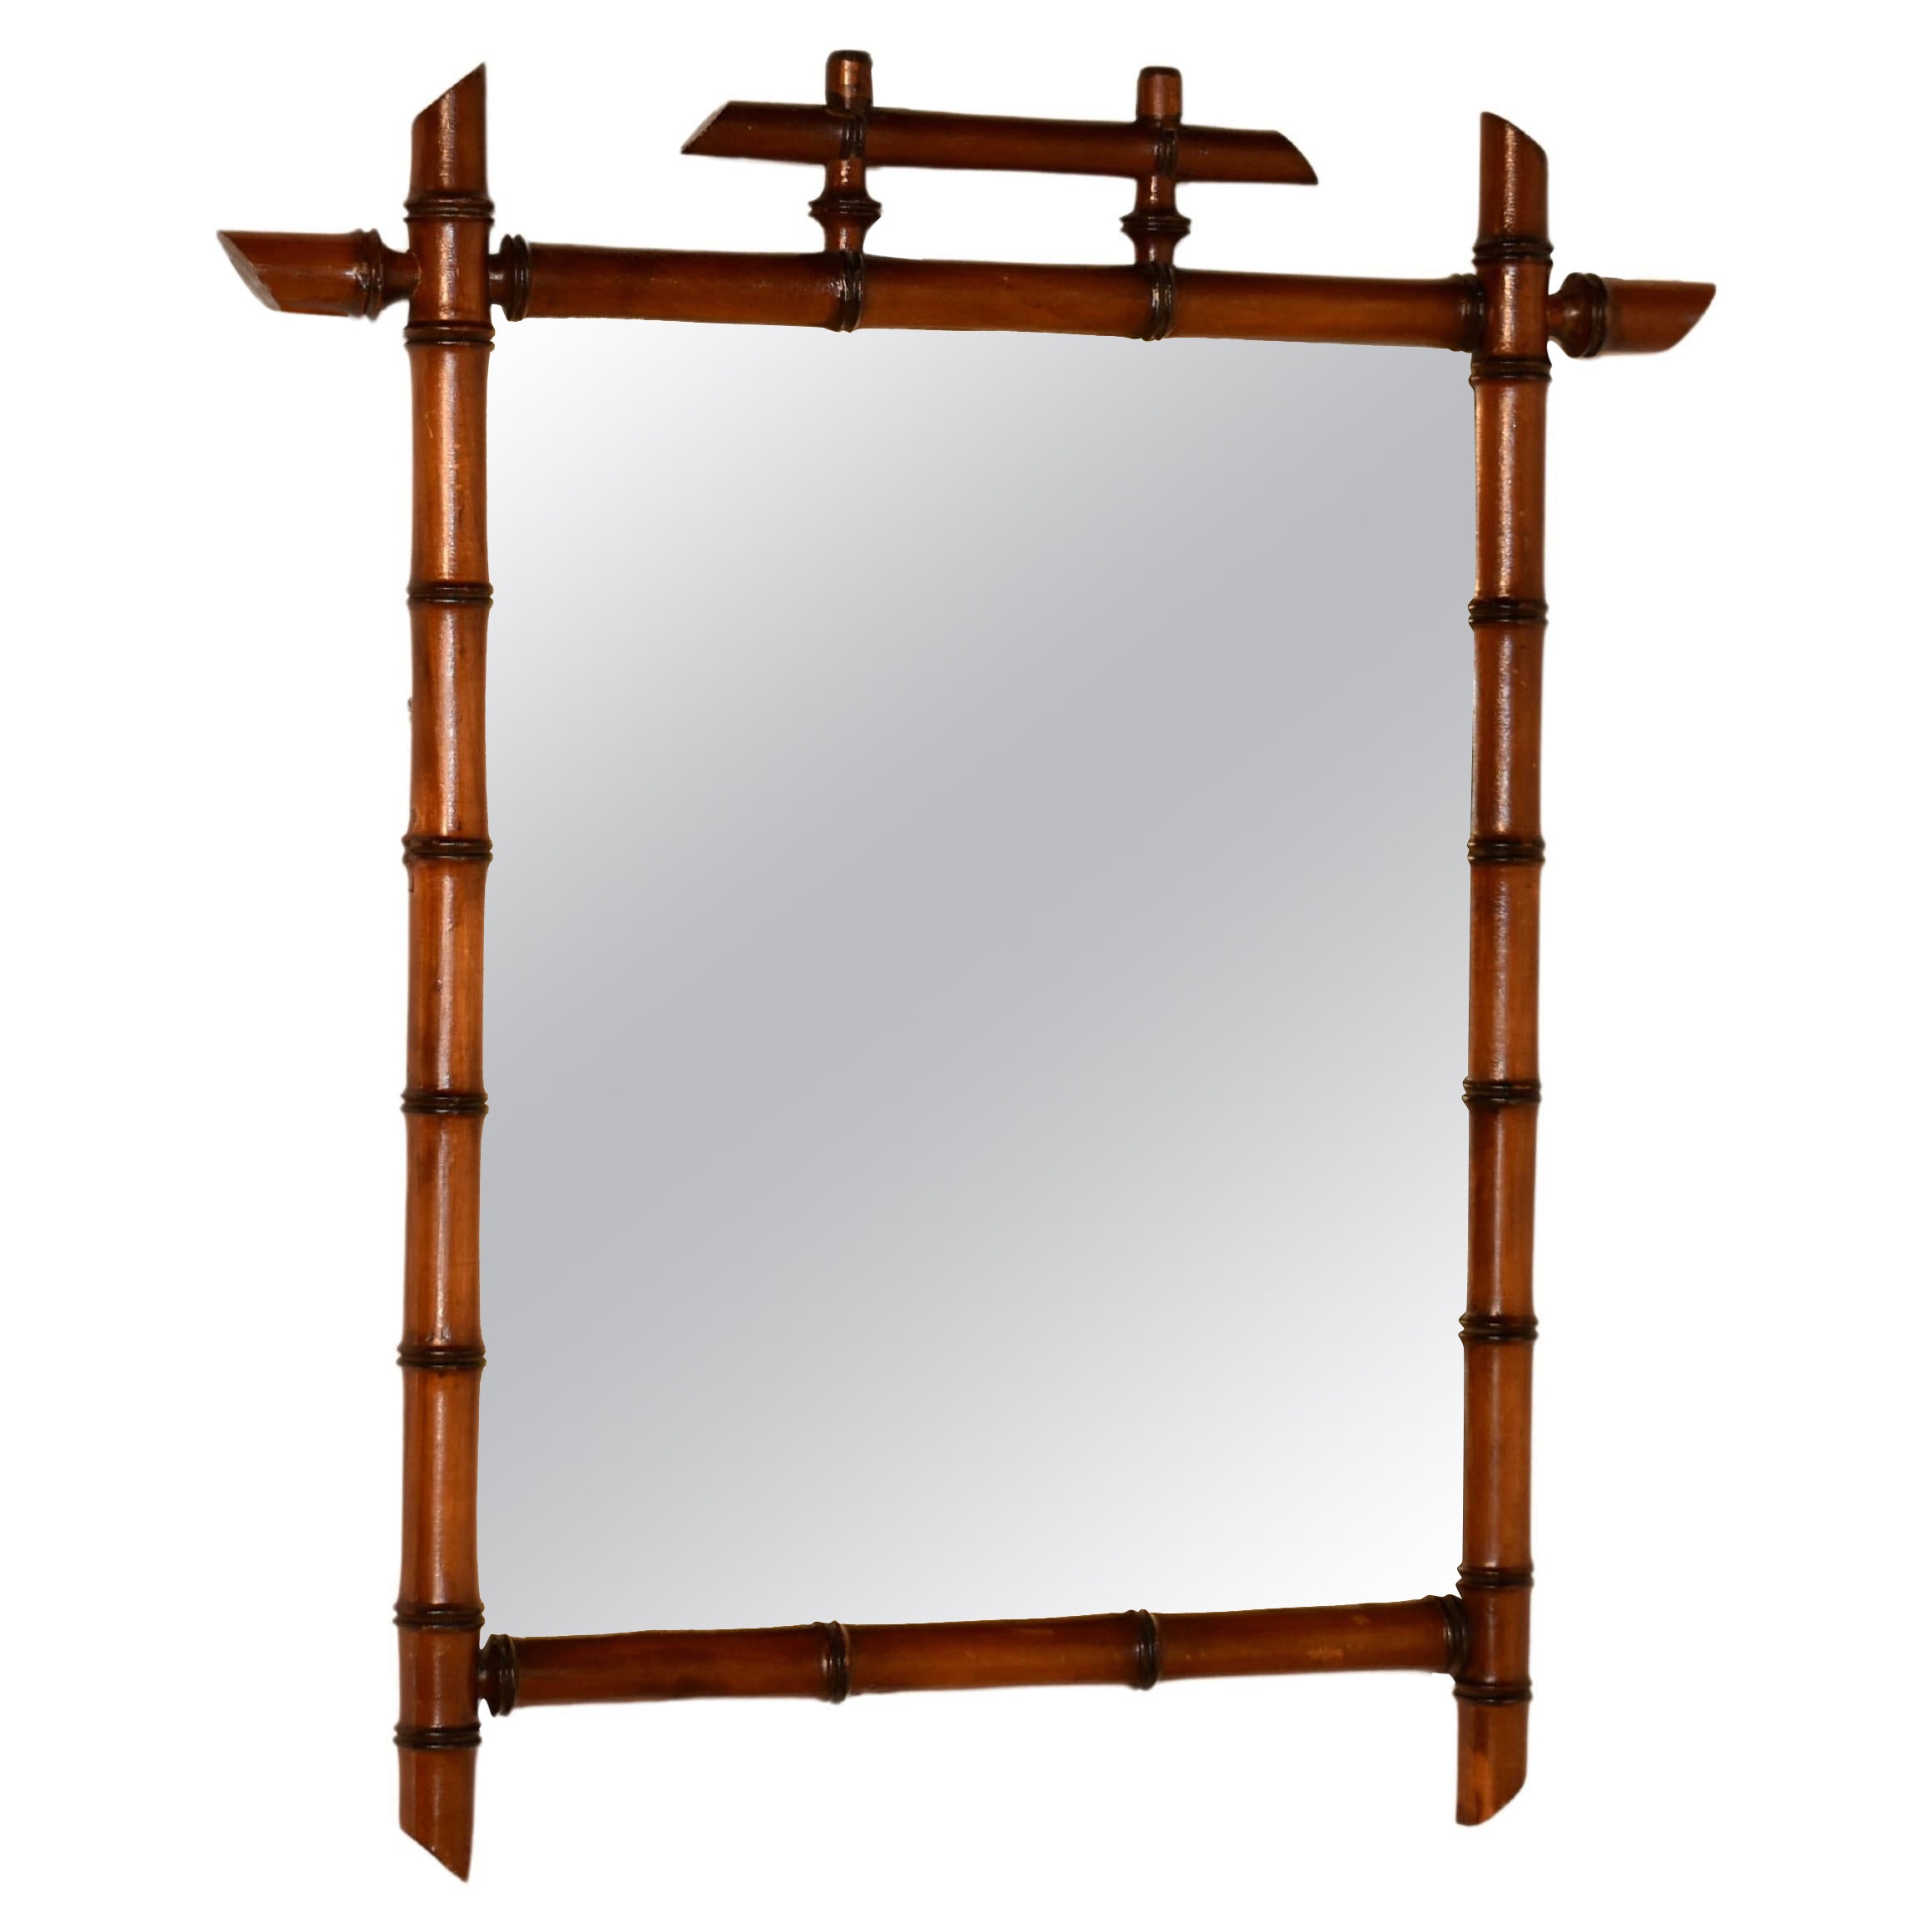 Late 19th Century Faux Bamboo Wall Mirror